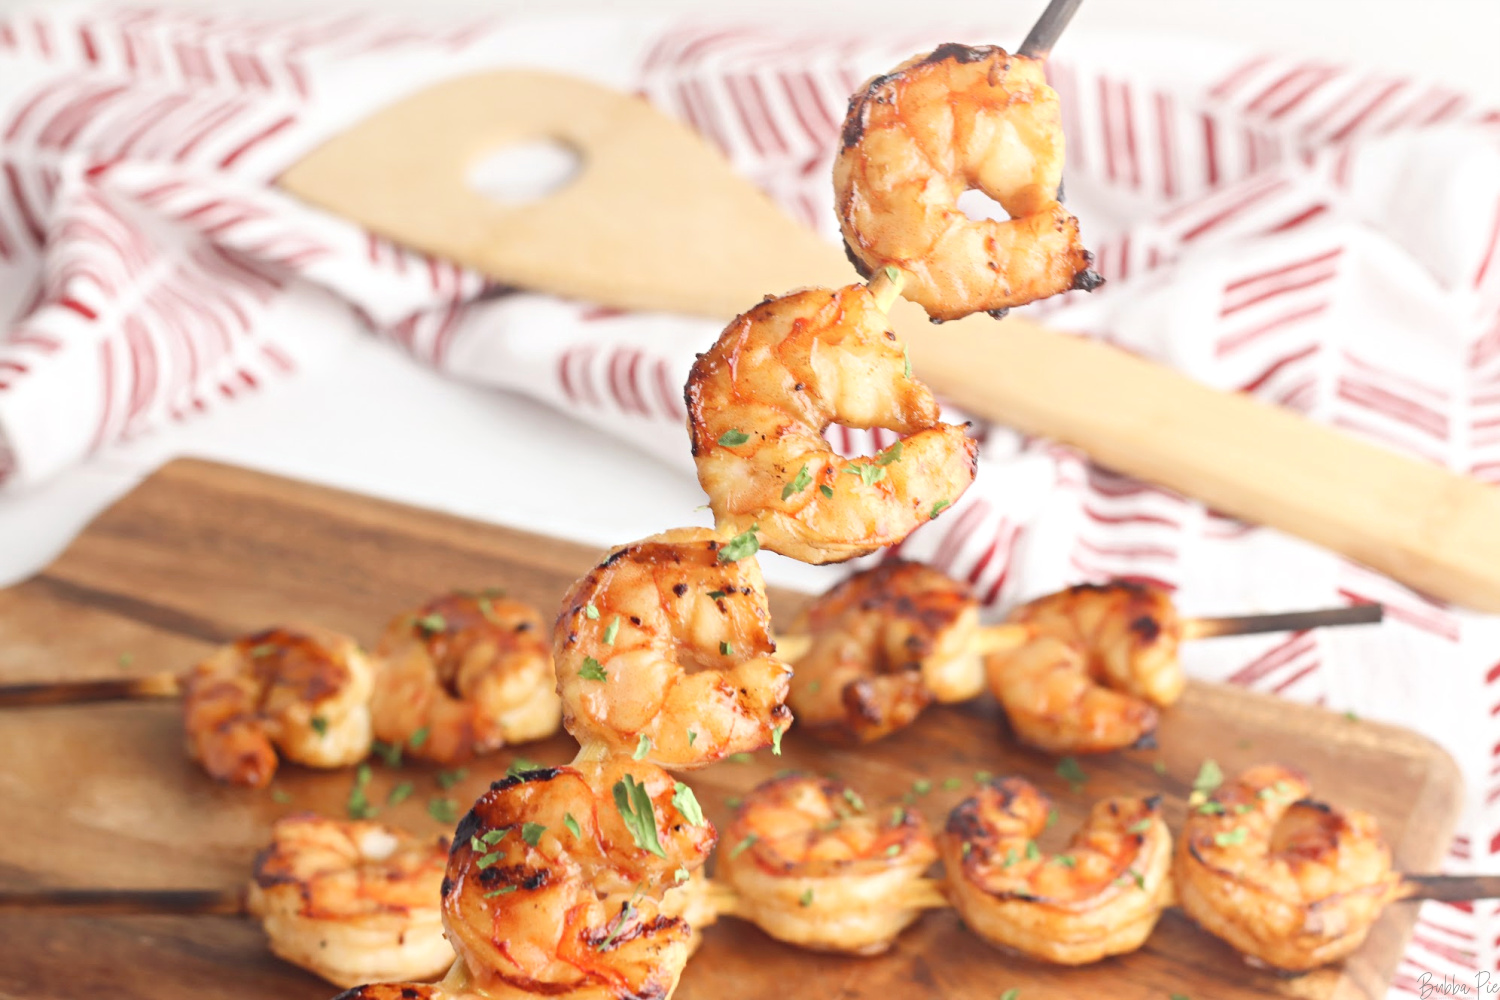 Grilled Teriyaki Shrimp Skewers being served on the cutting board. 